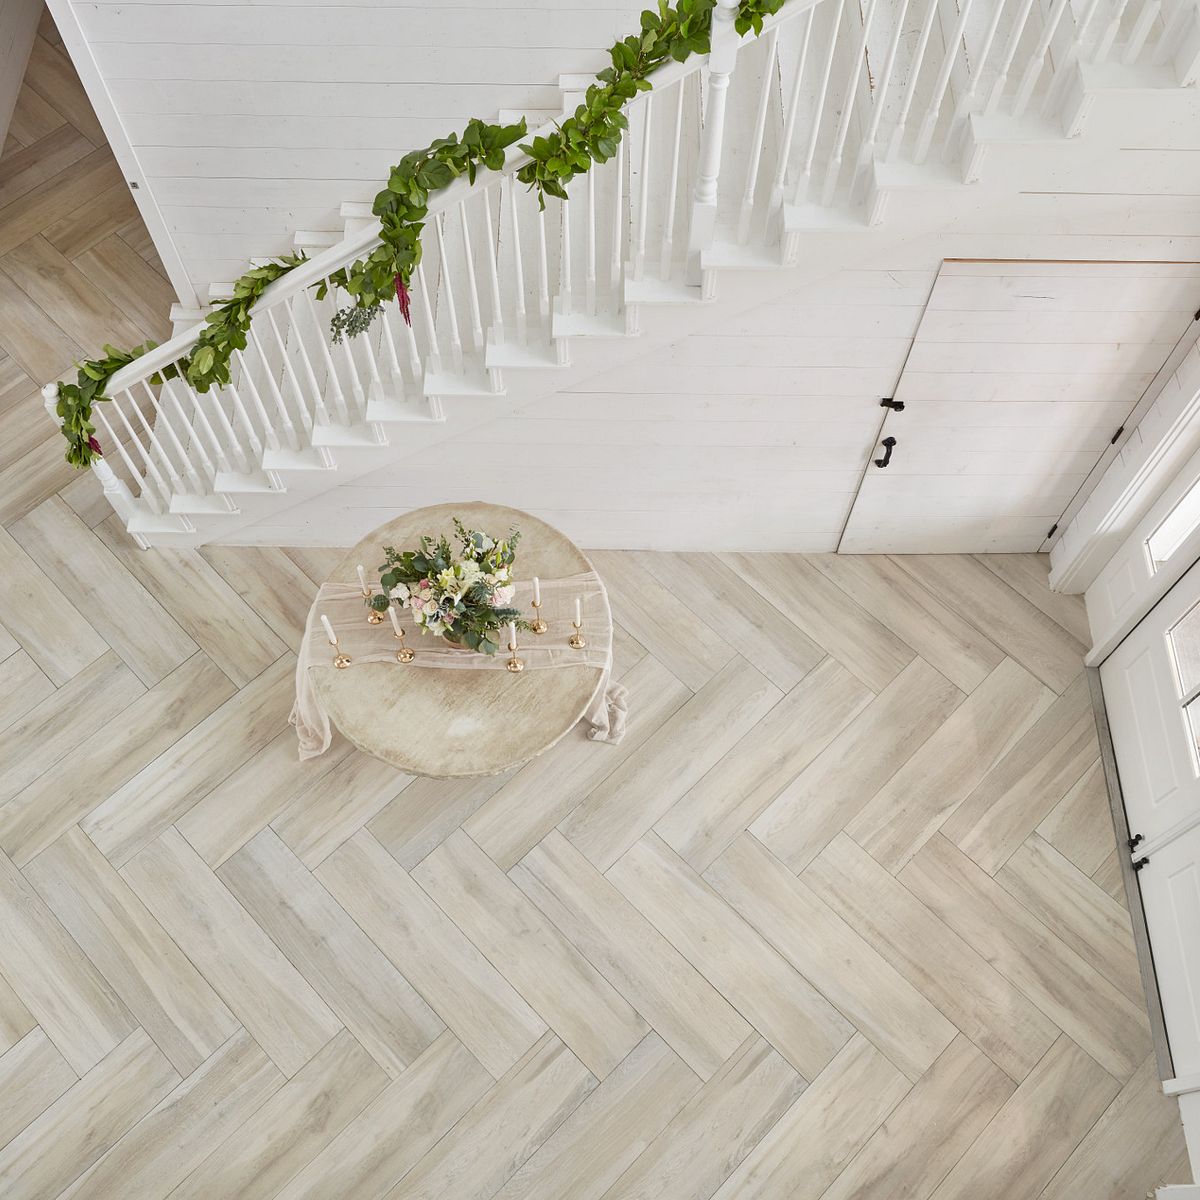 Aequa Tile with table on the top and white stairs